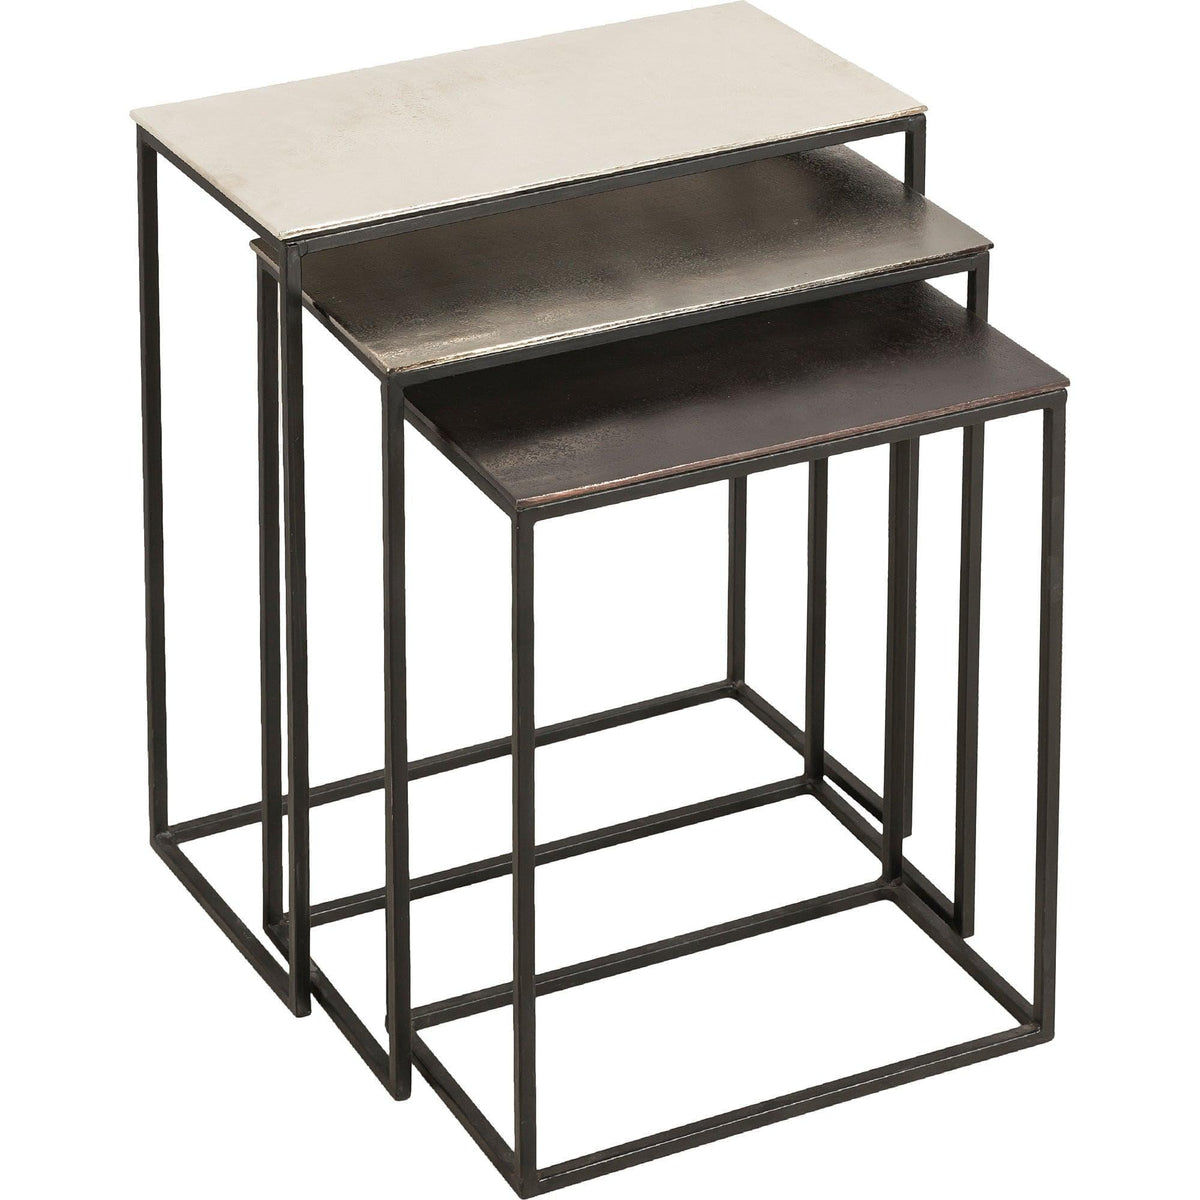 Renwil - Manisa Accent Table - TA298 | Montreal Lighting & Hardware